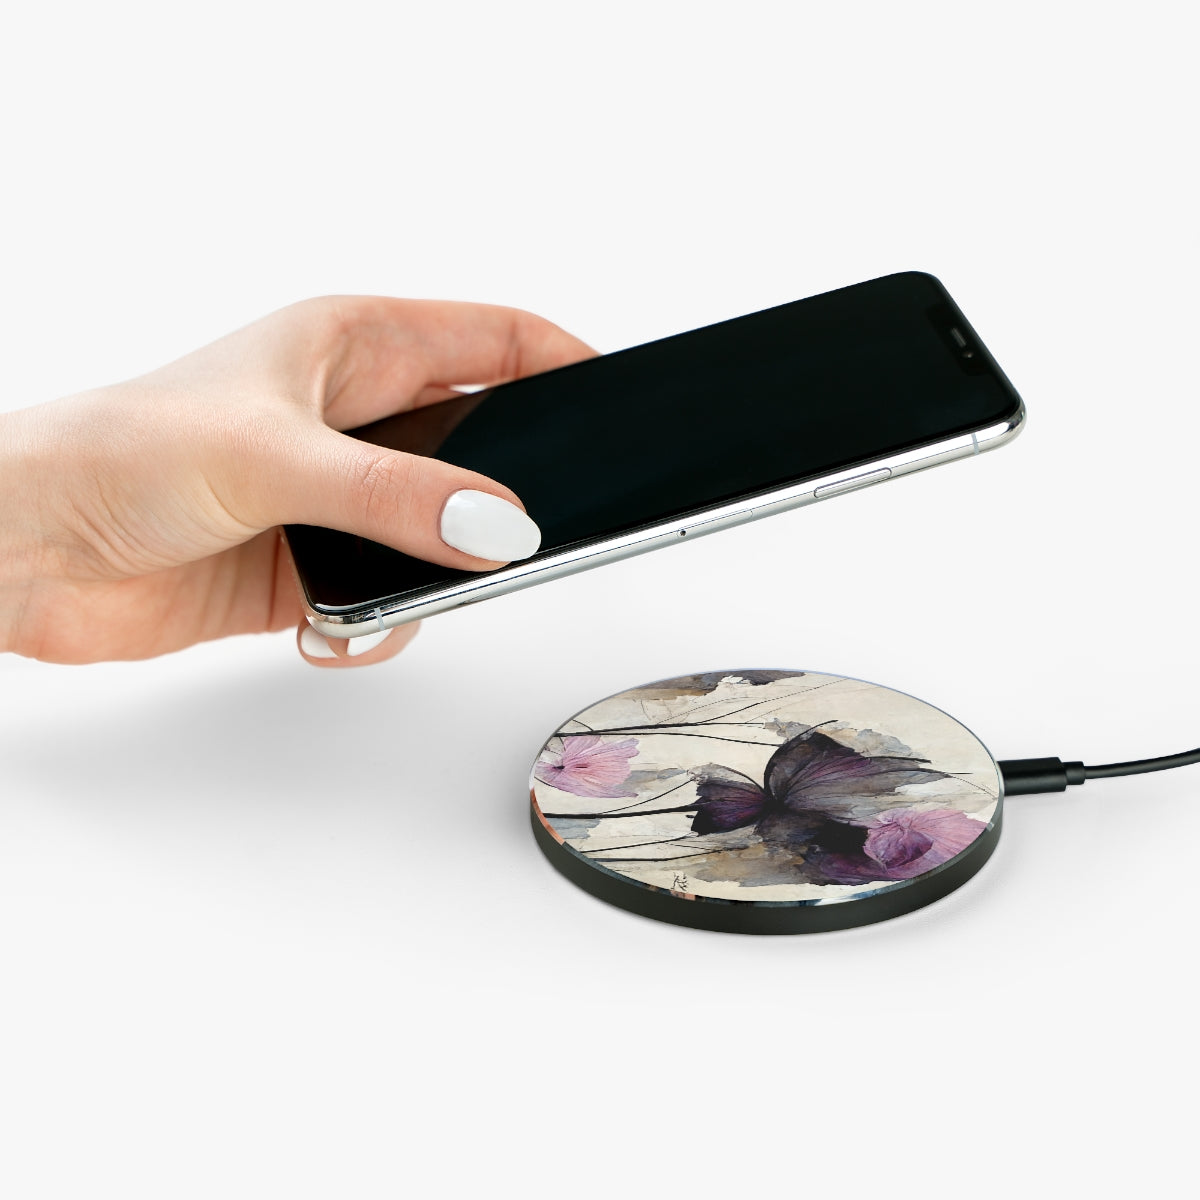 Round / One size 4 Incept Ink Wireless Charger